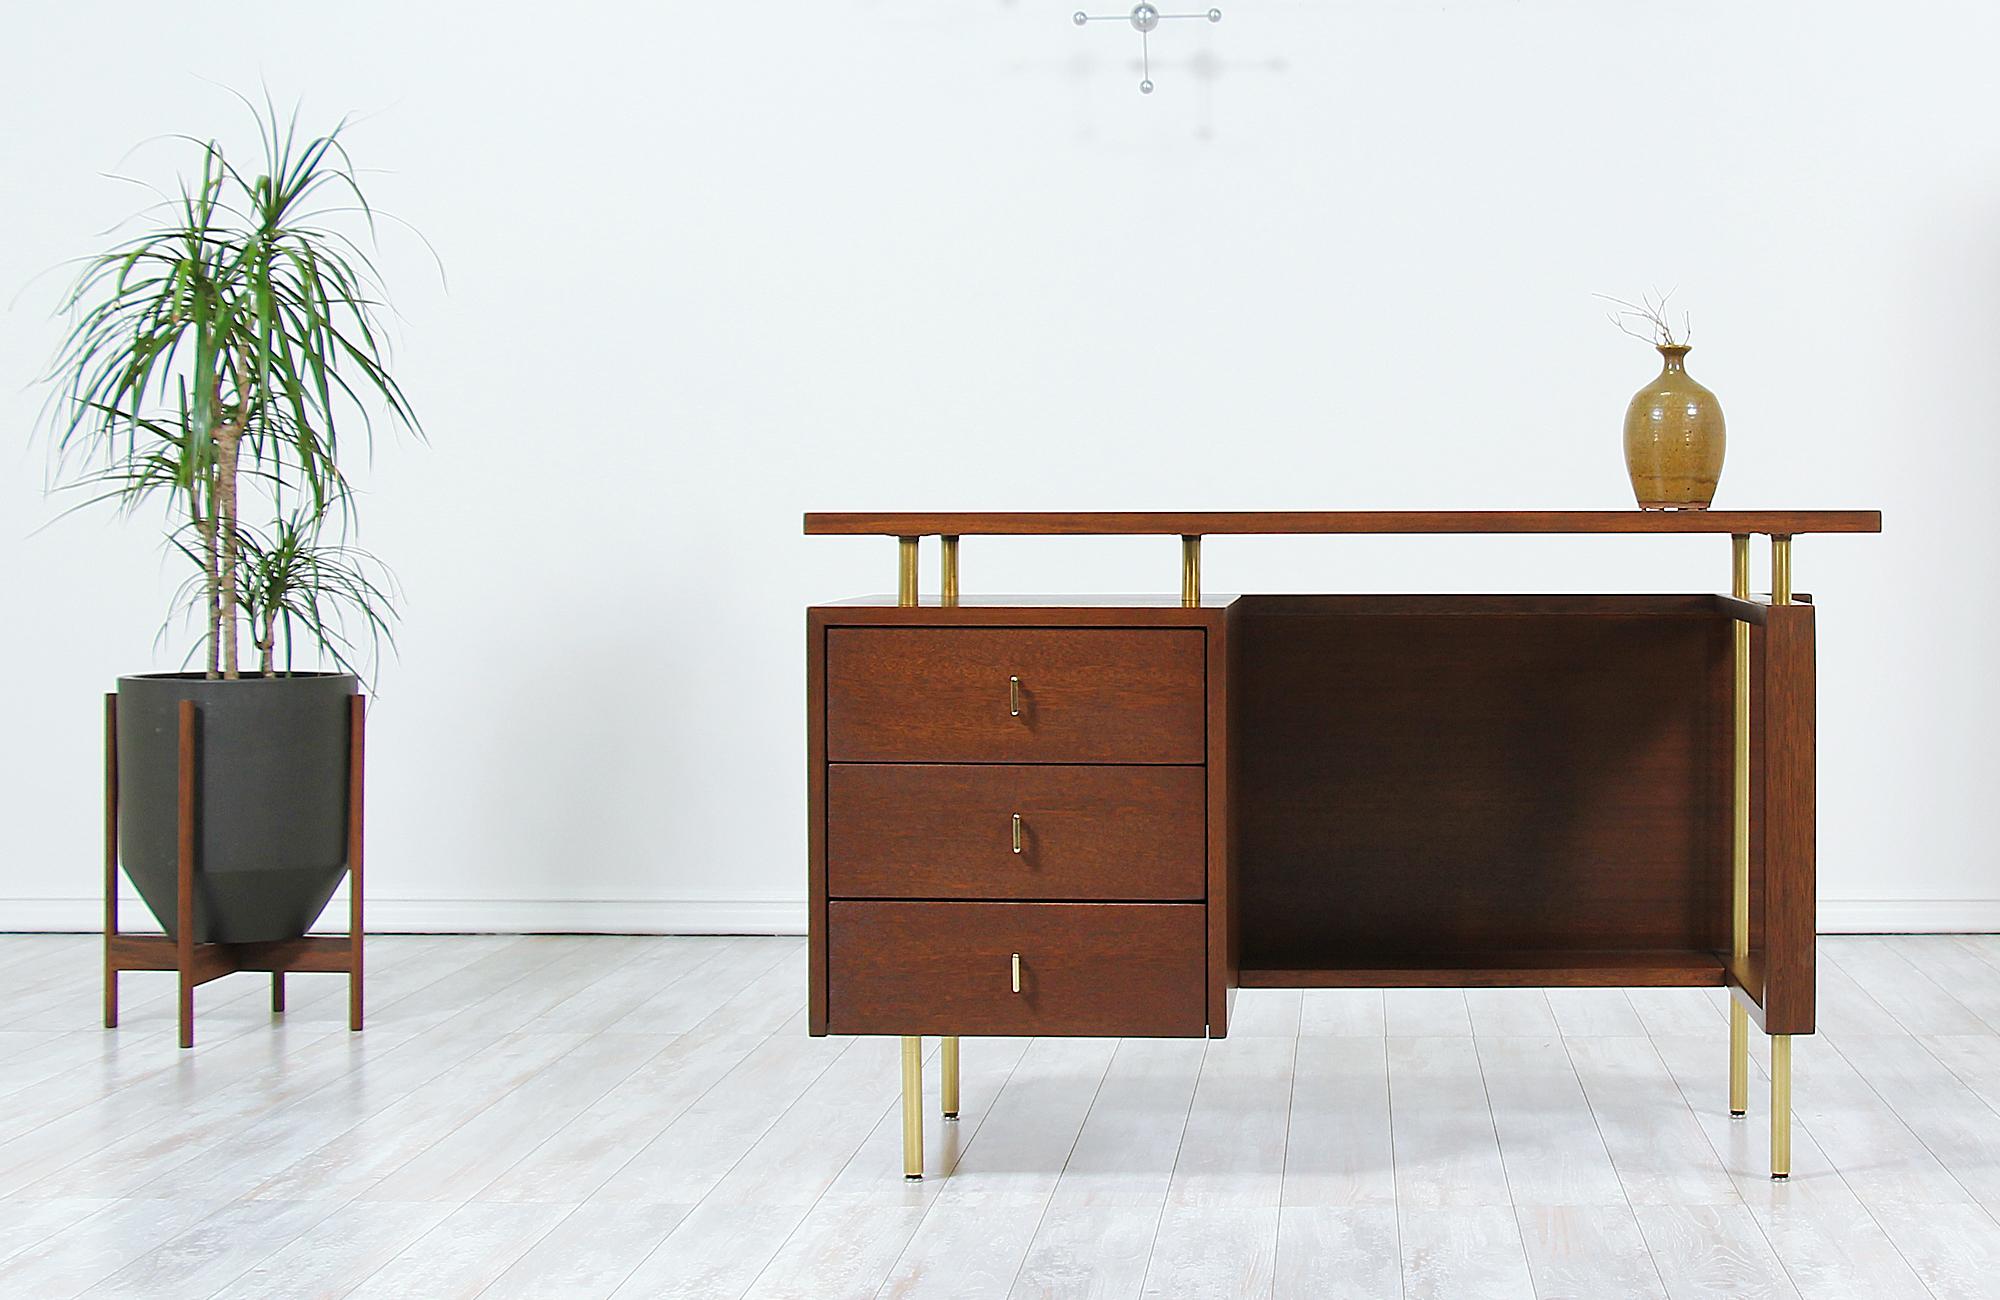 Stylish modern desk designed by John Keal for Brown Saltman in the United States circa 1950s. This exceptionally crafted desk features mahogany that has been stained in a warm walnut tone. The caned back adds an attractive element, allowing it to be